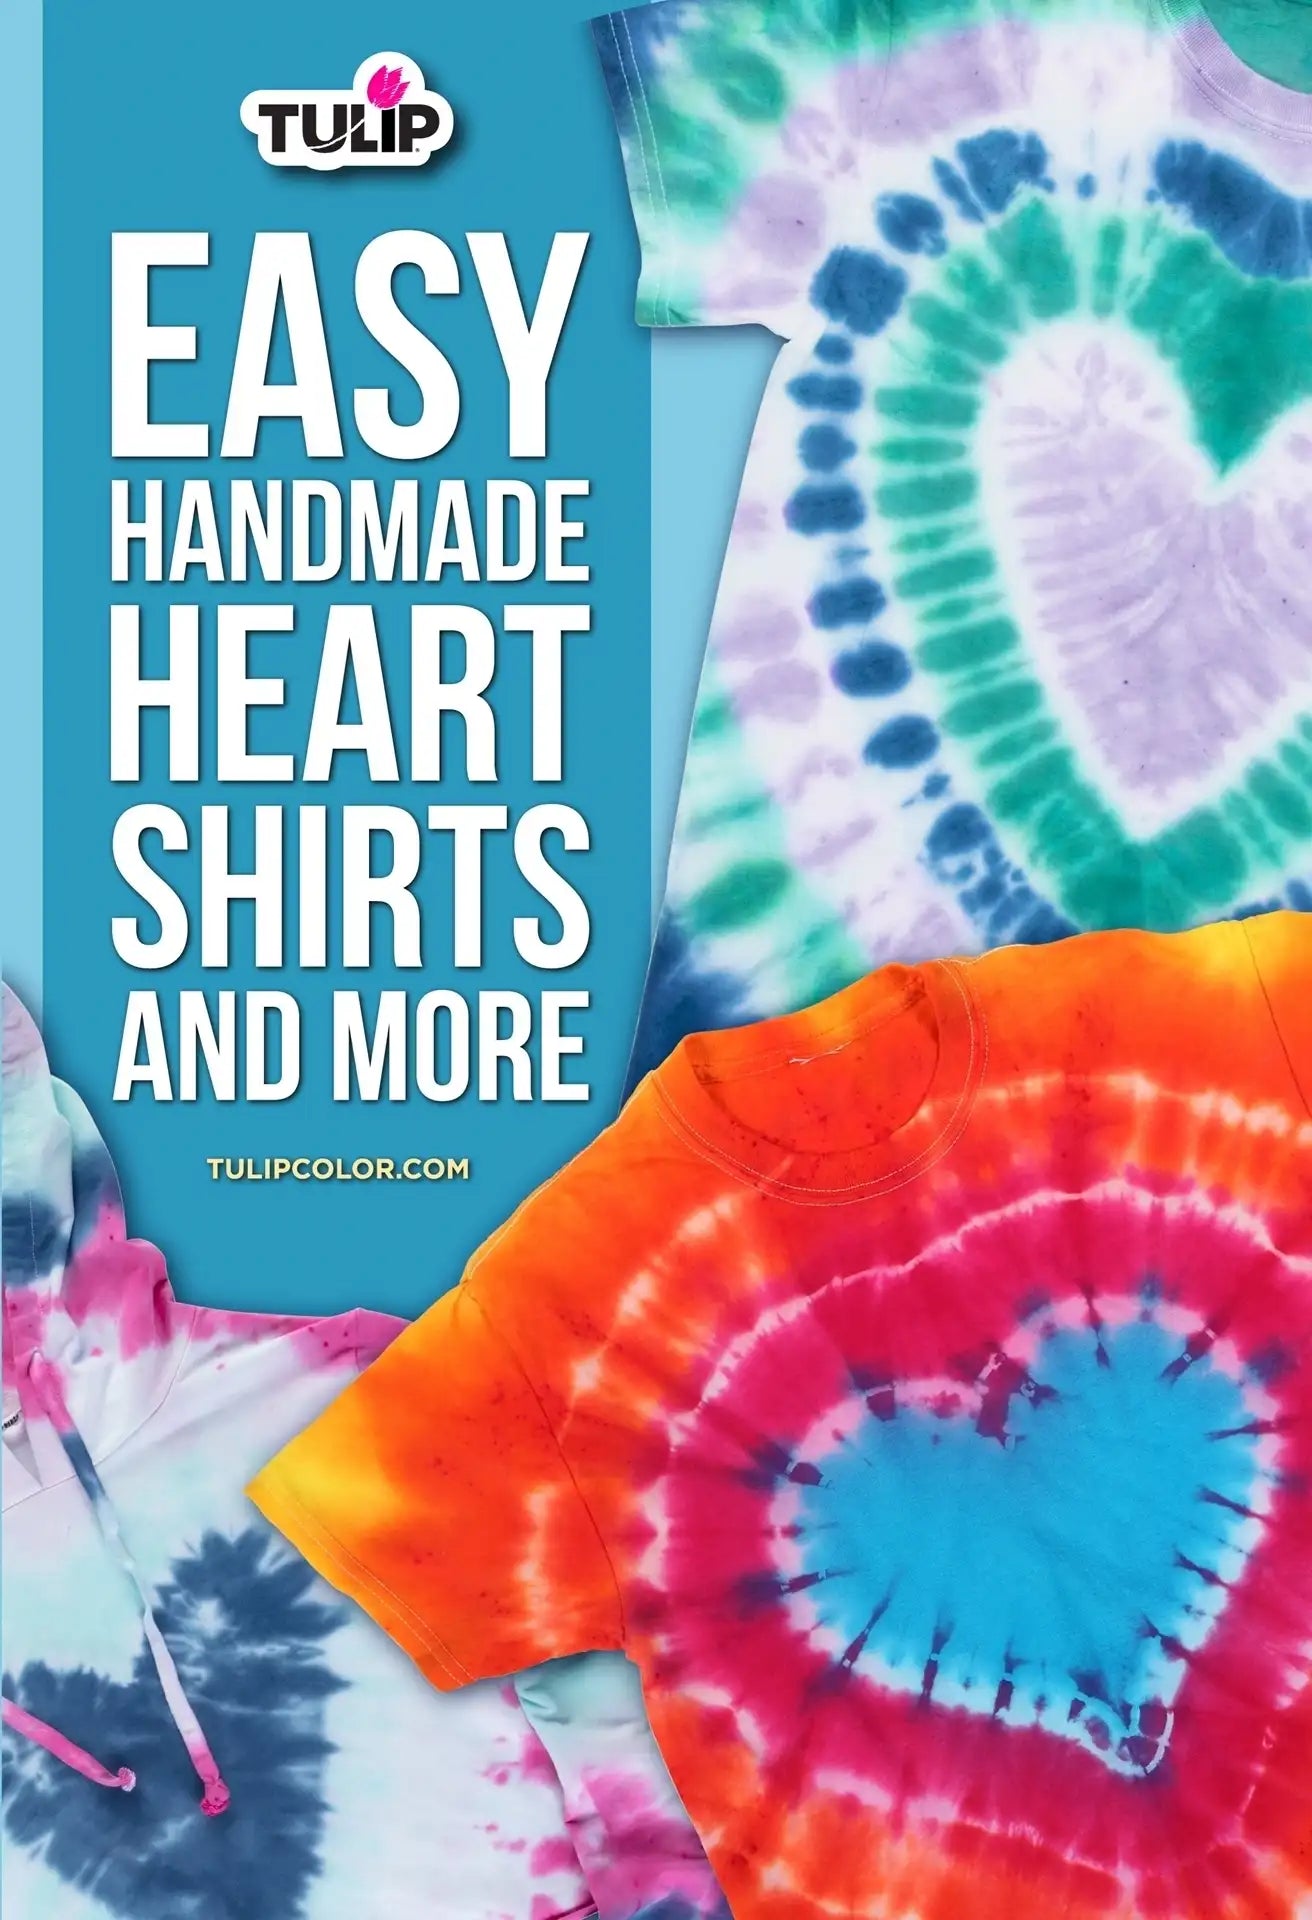 How to Make a Heart Tie Dye Shirt for Valentine's Day - Creative